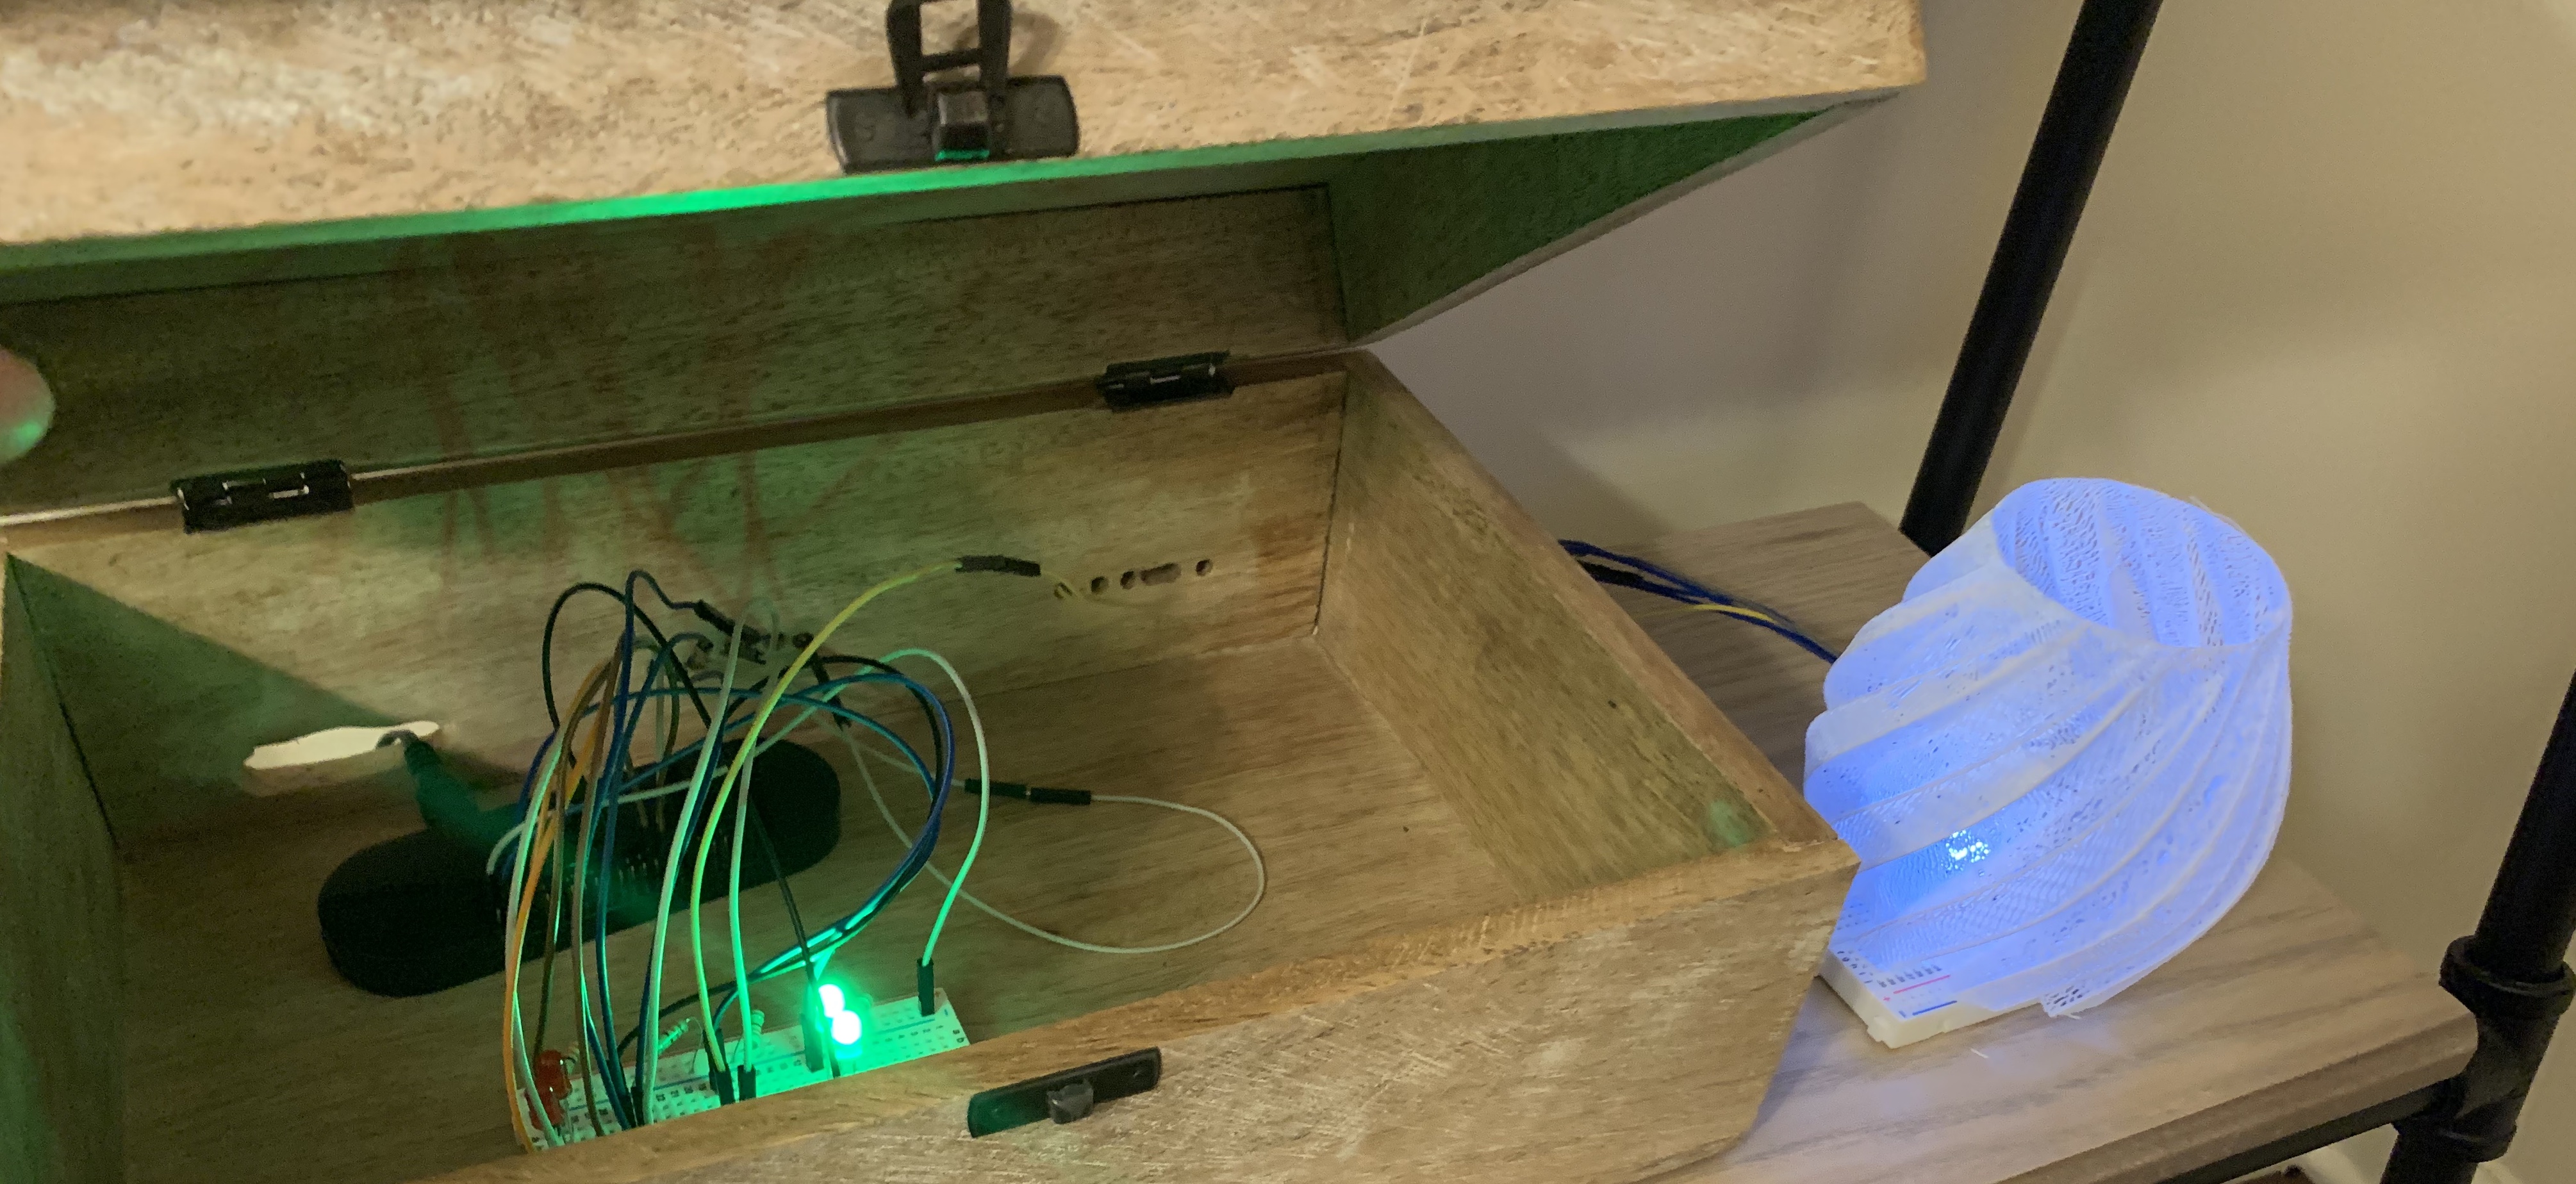 Weather Lamp Connected to Raspberry Pi